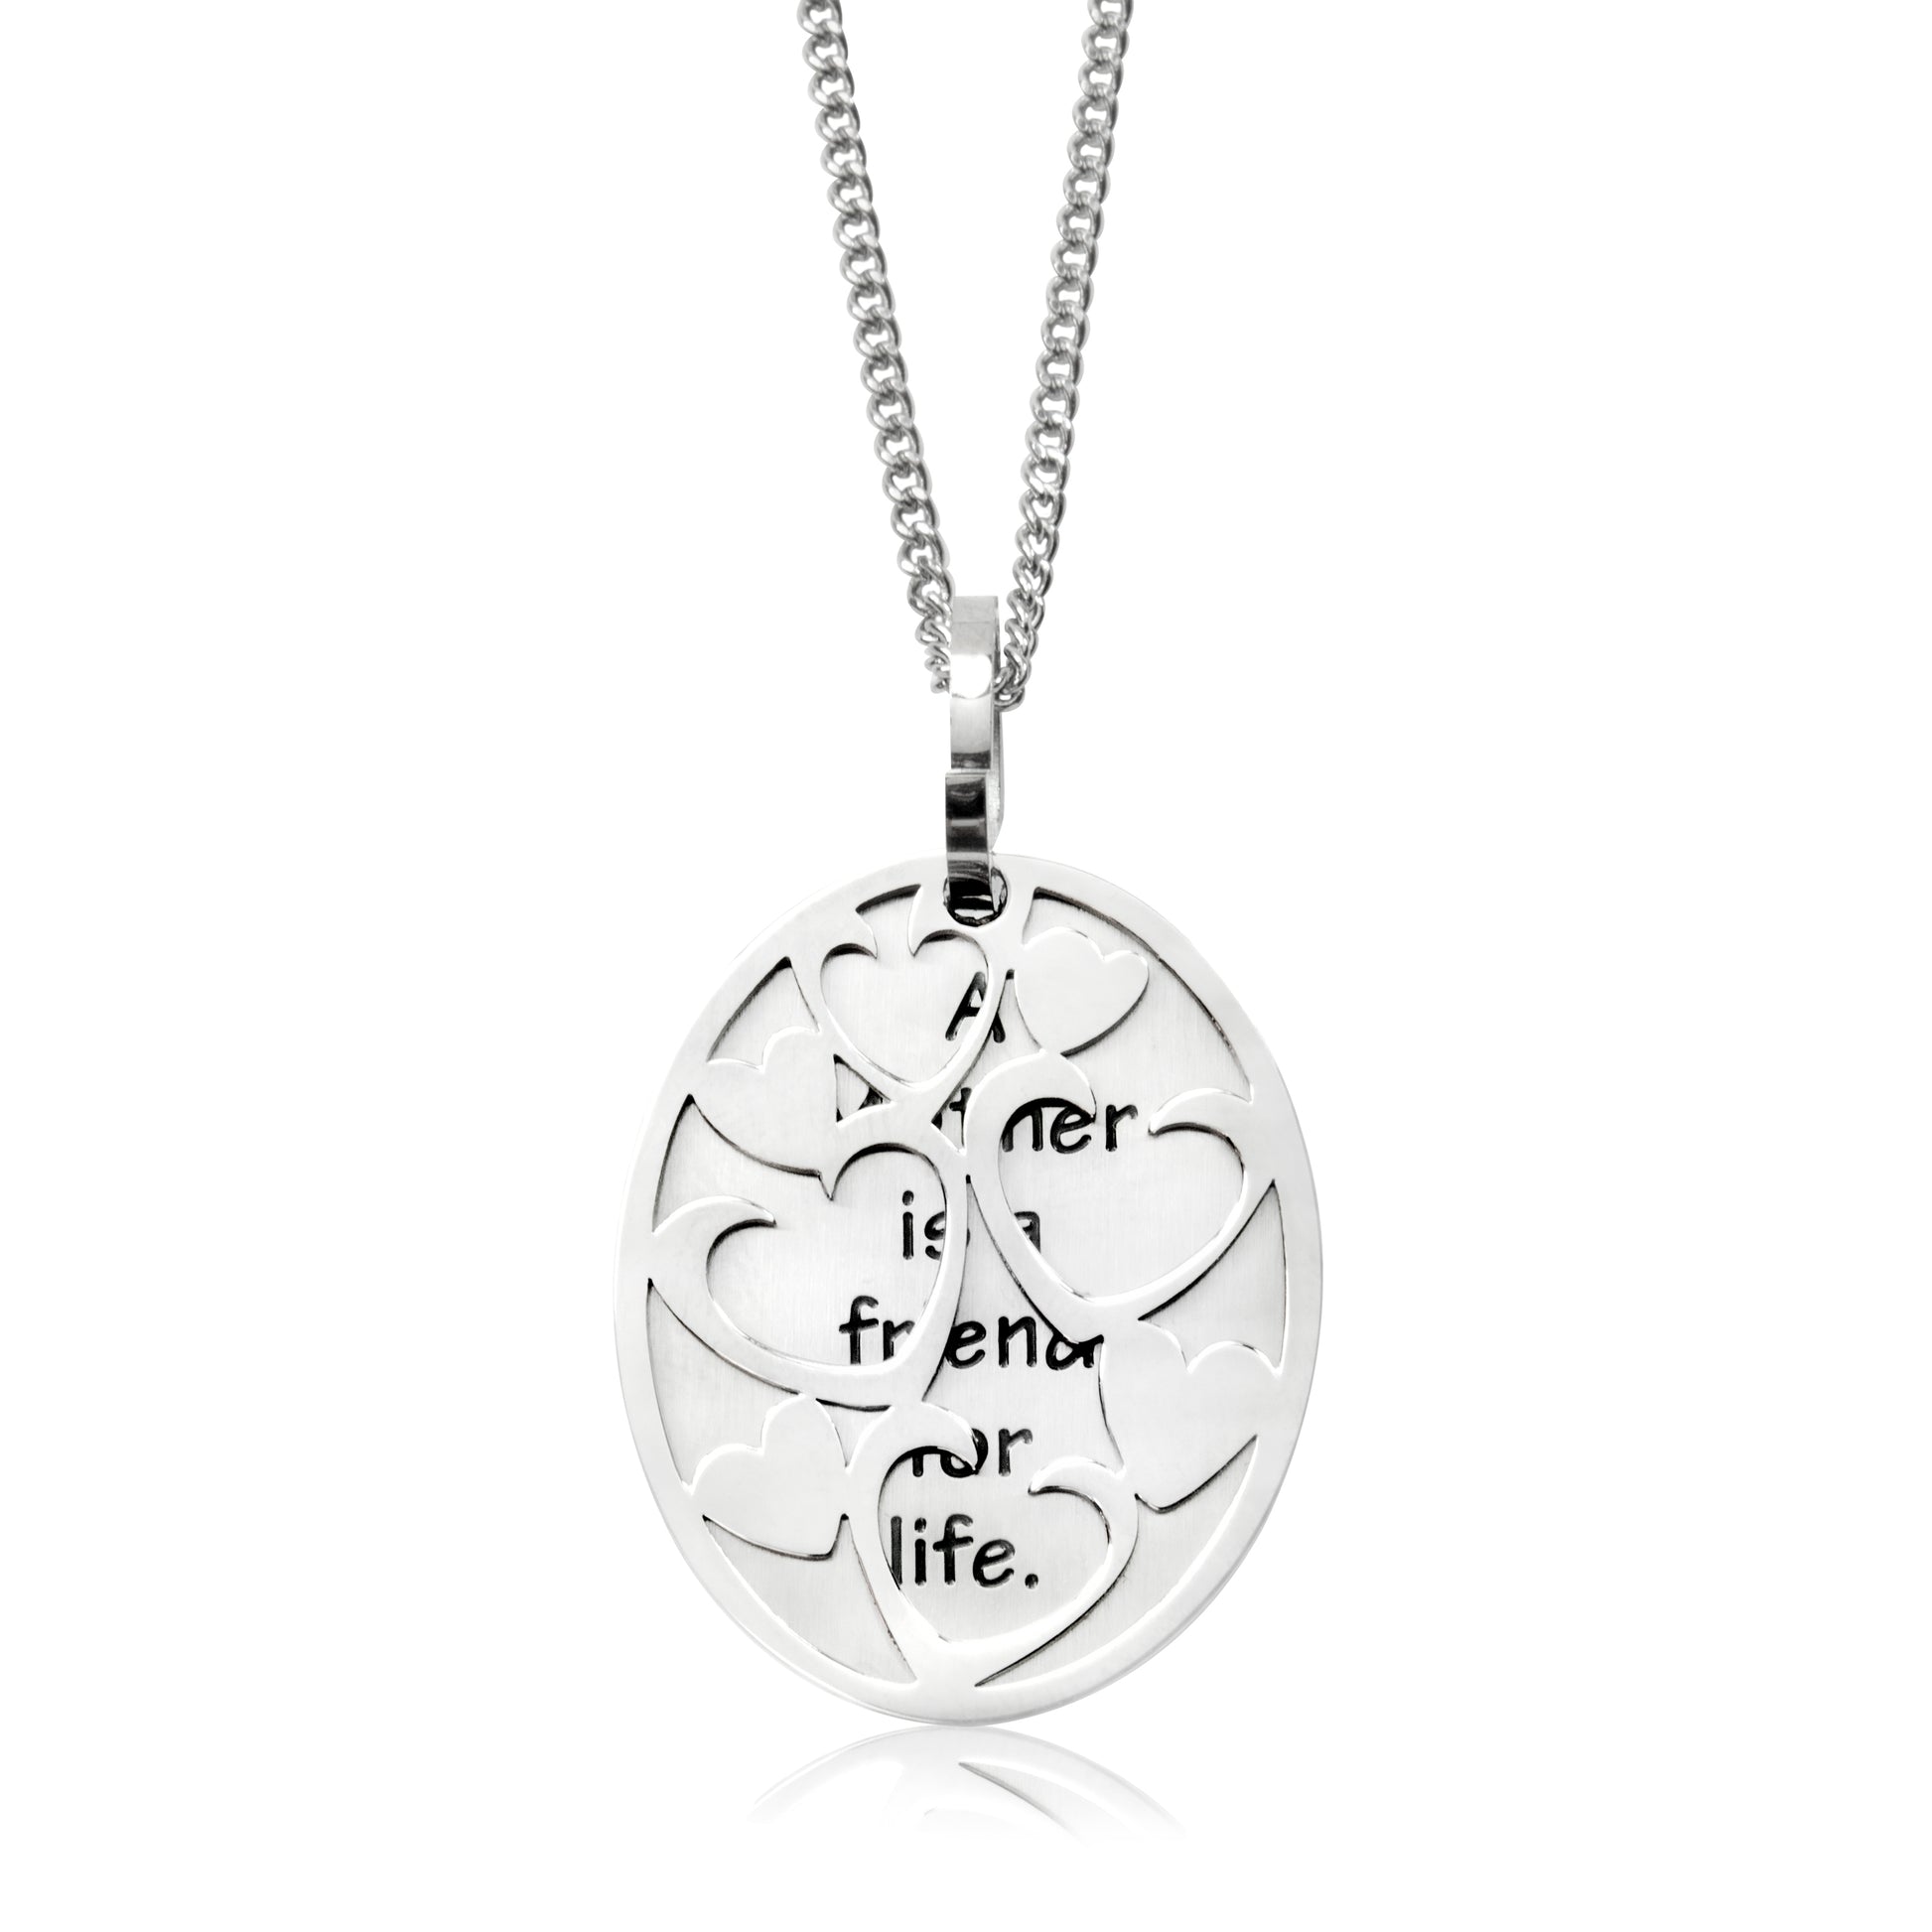 Steel "A Mother is a Friend for Life" Heart Pendant Necklace, Perfect Sentimental Gift for Mom